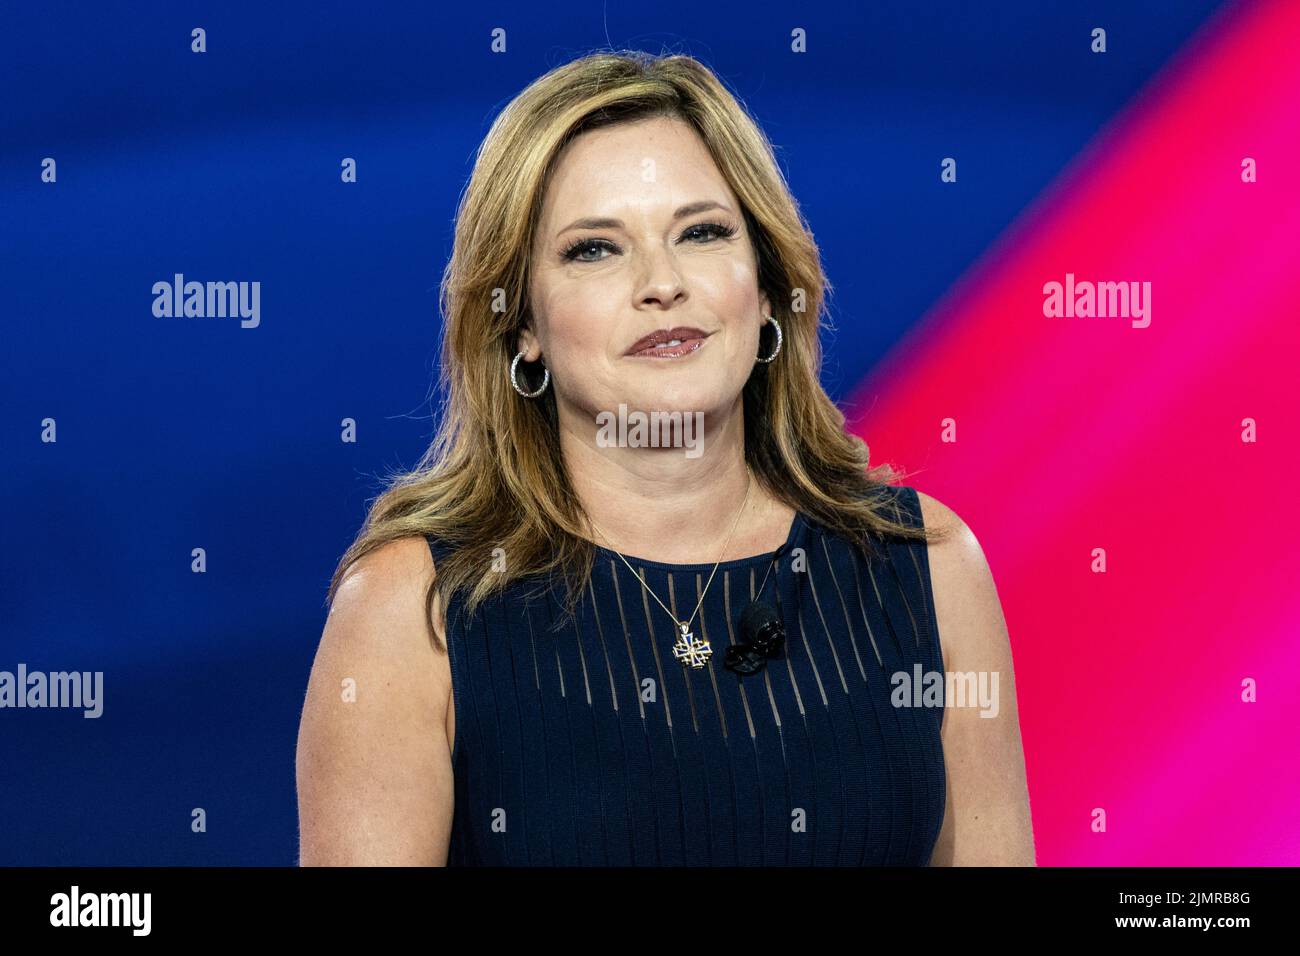 Dallas, TX - August 4, 2022: Mercedes Schlapp speaks during CPAC Texas 2022 conference at Hilton Anatole Stock Photo